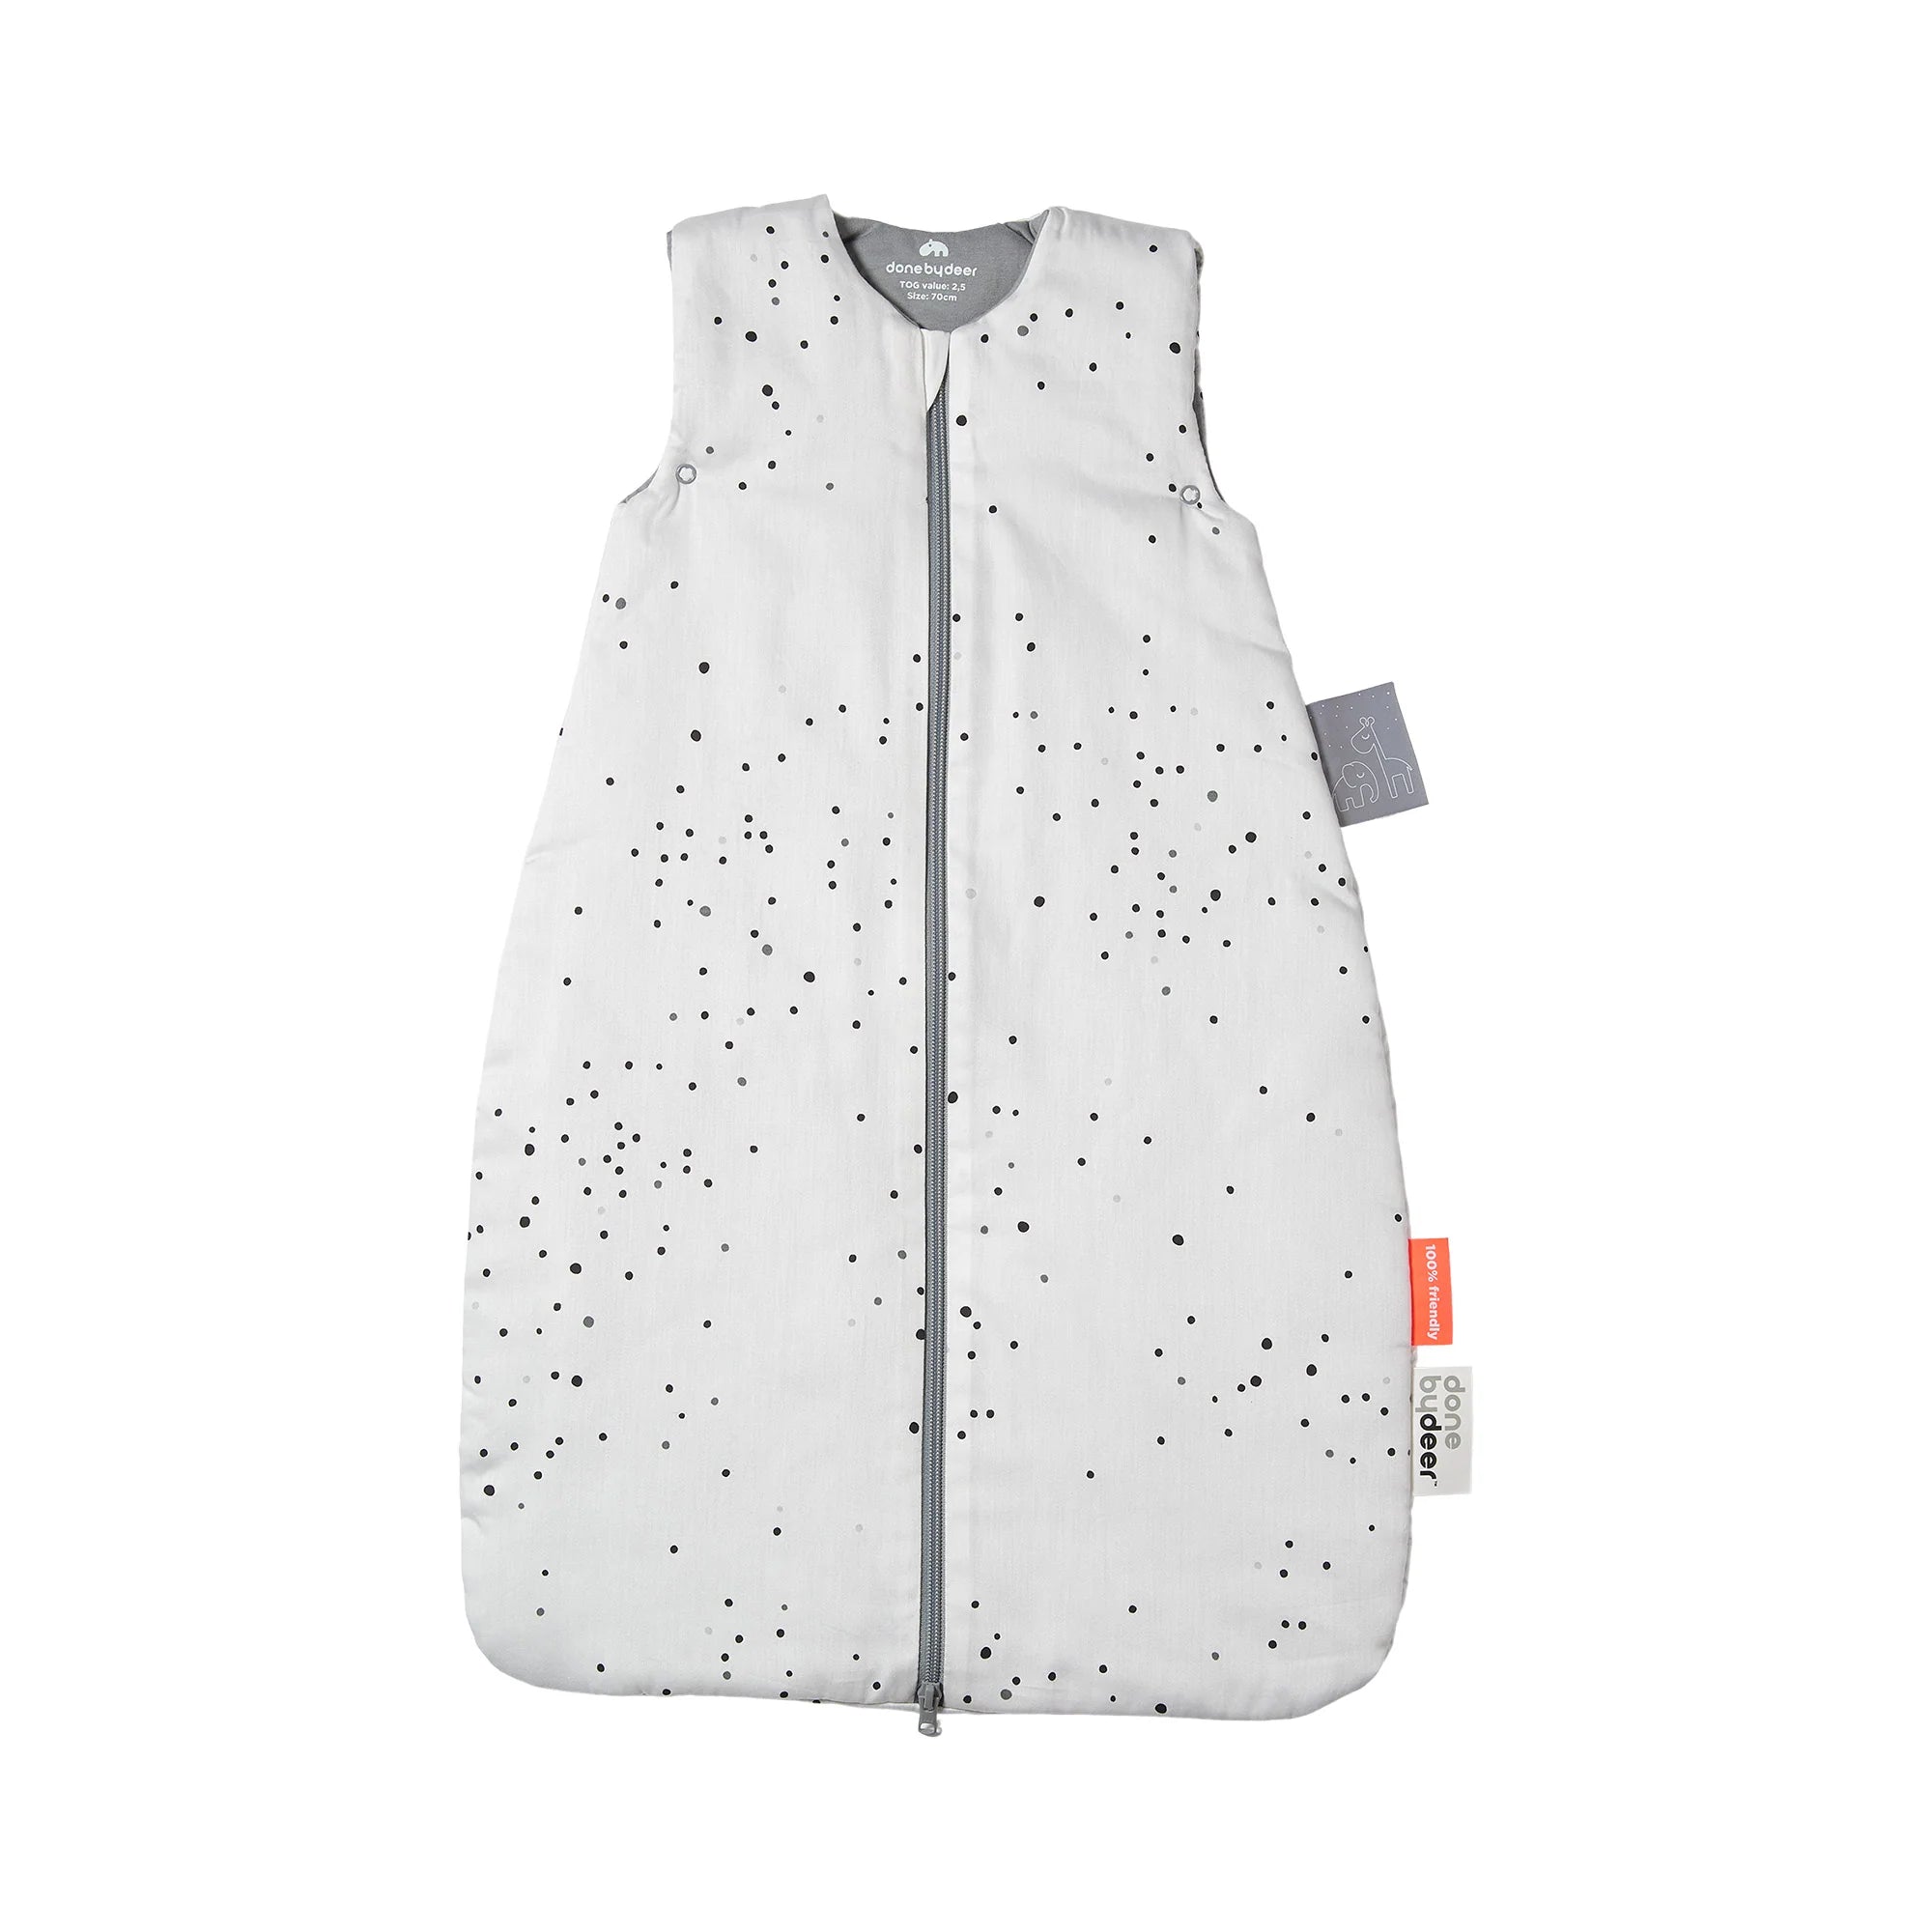 An image of White Baby Sleeping Bag 70cm - 2.5 Tog - Dreamy Dots 90cm